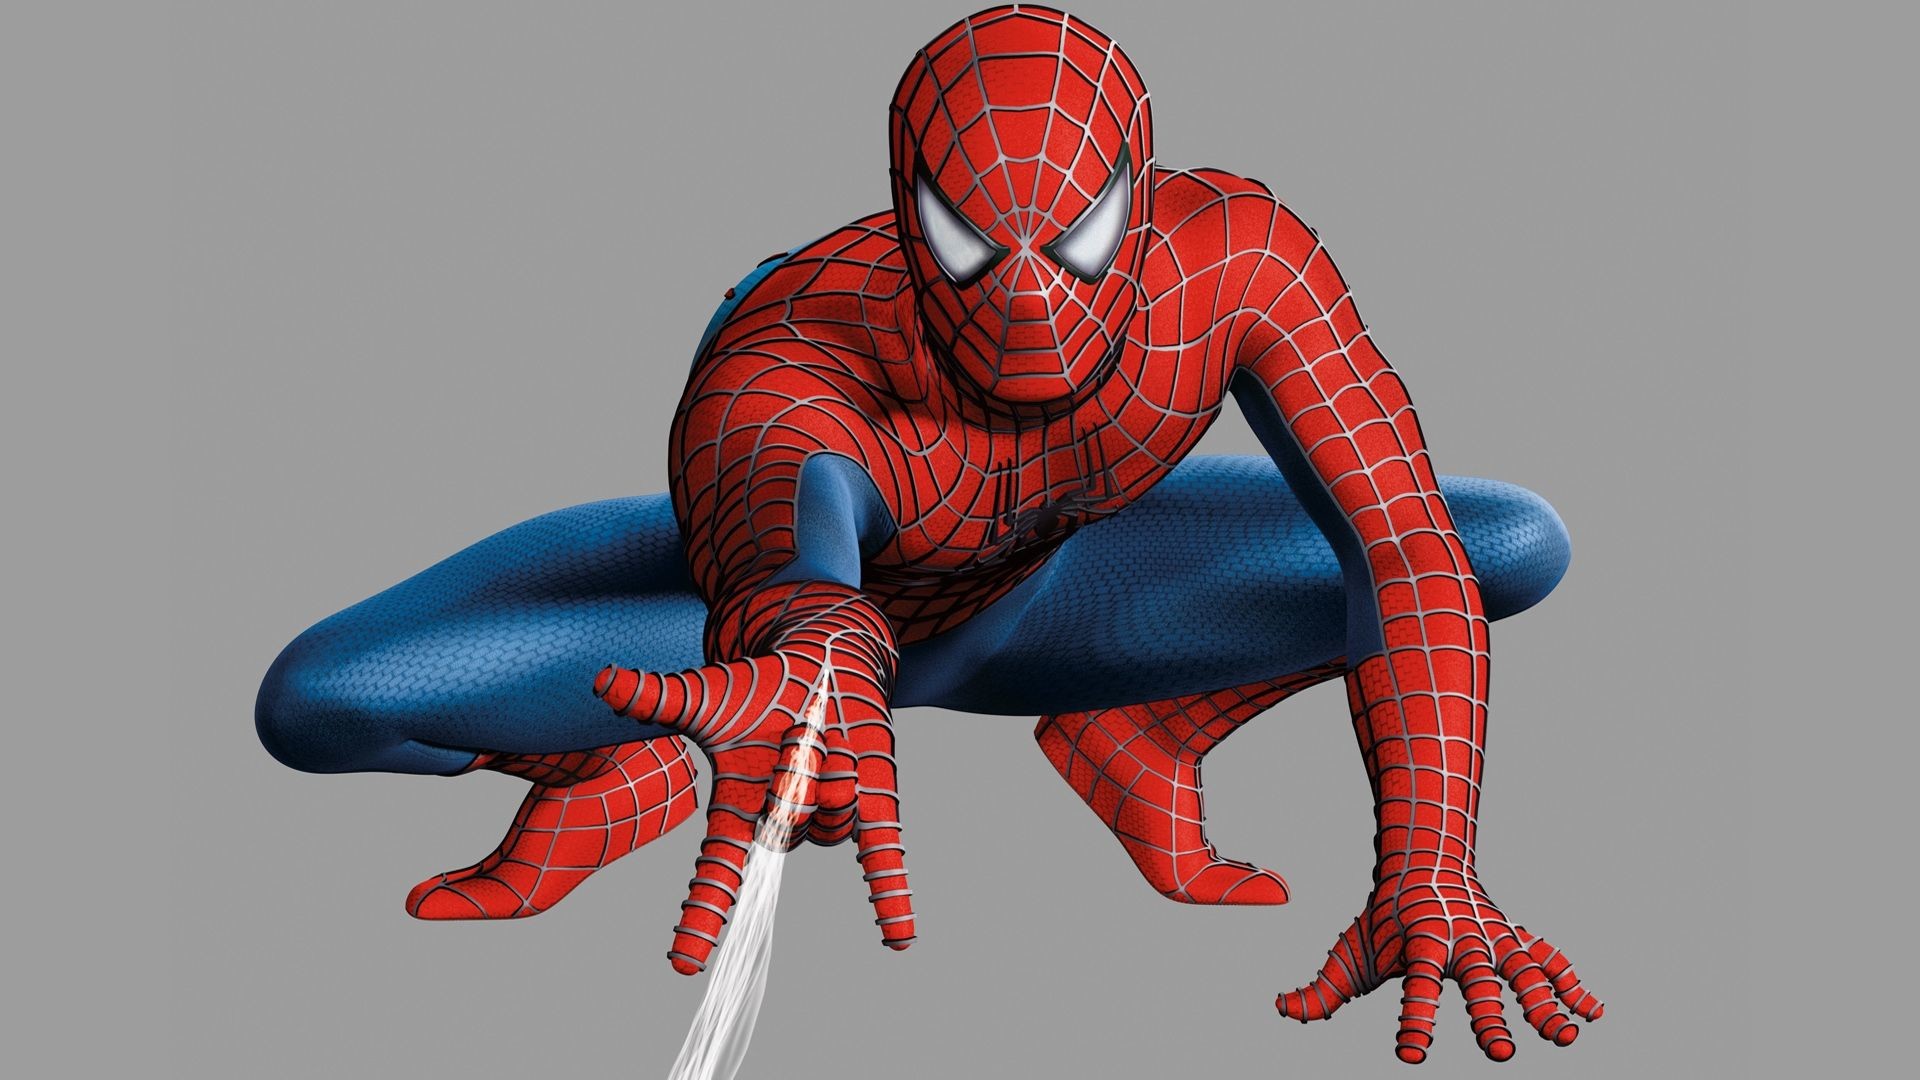 Free HD Spiderman wallpapers and Spiderman backgrounds in k,k HD Wallpapers Of Spiderman 4 Wallpapers